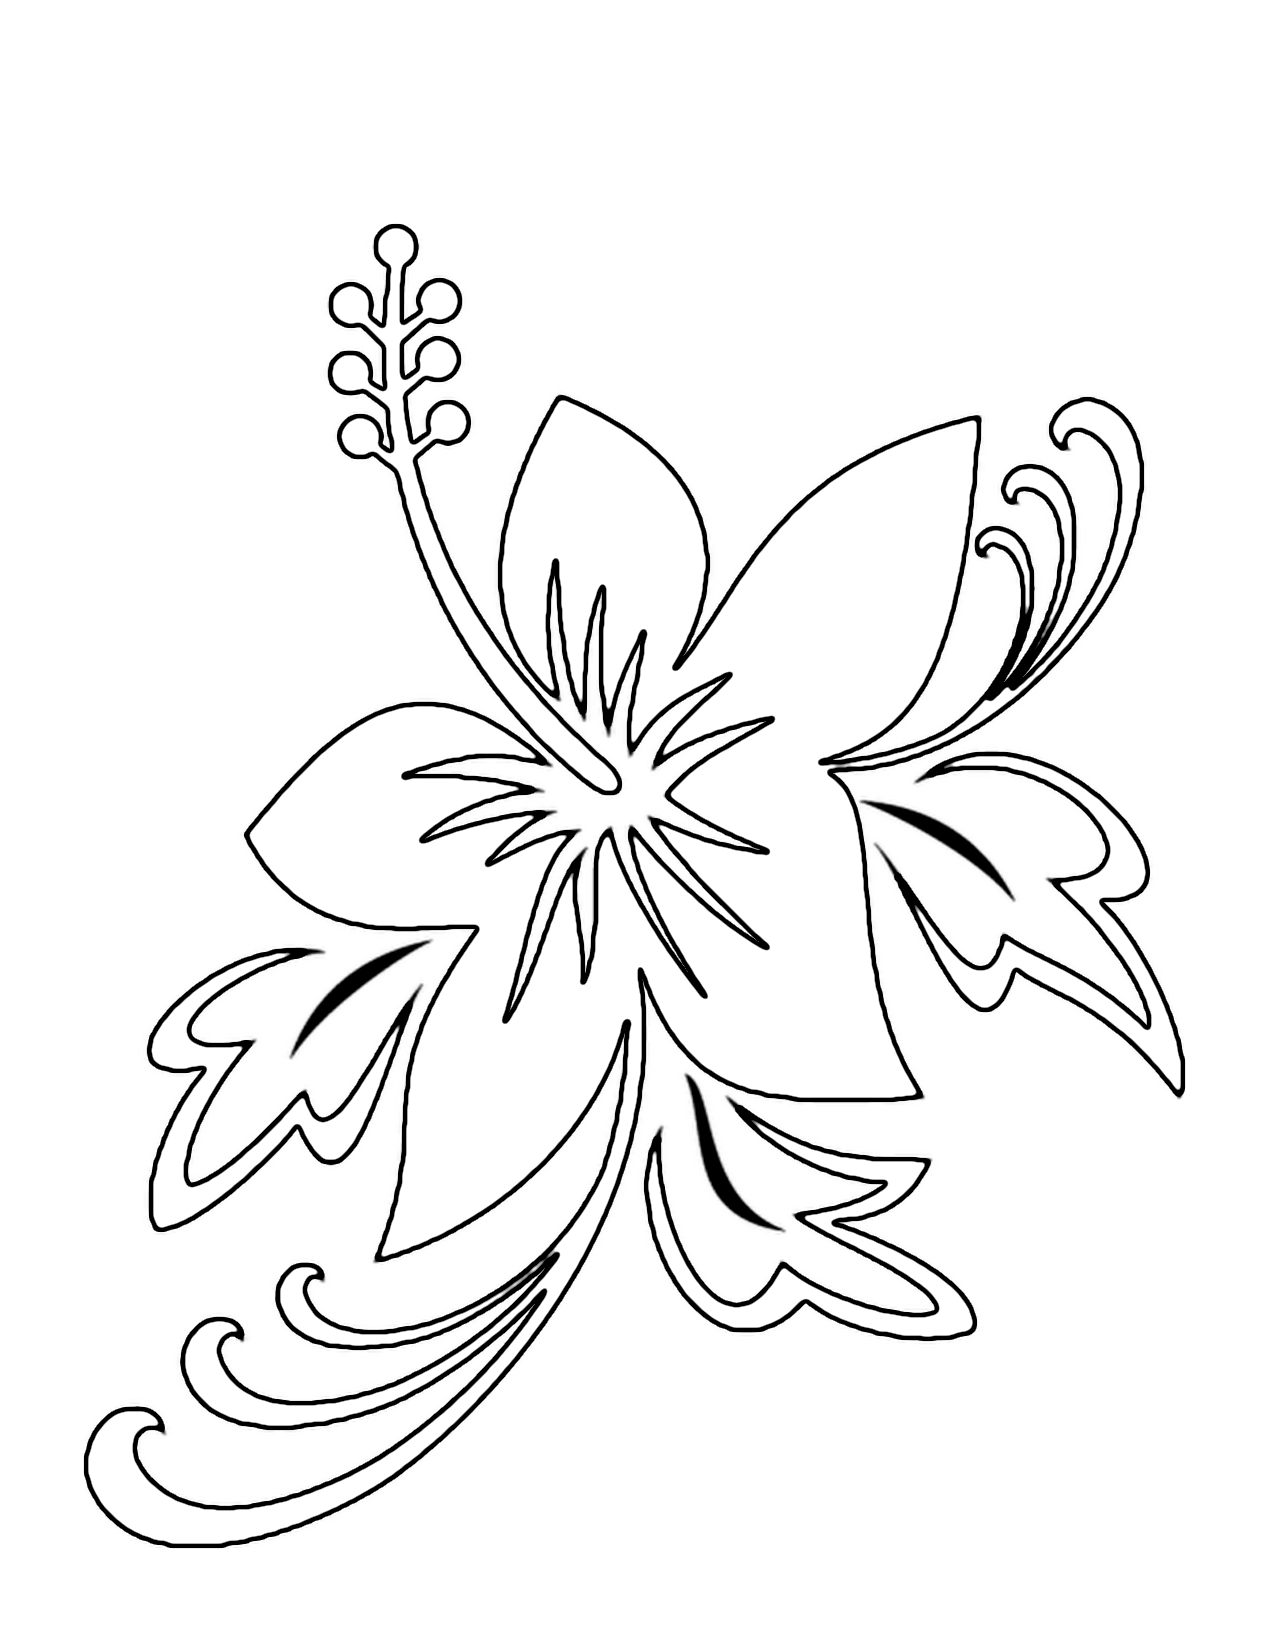  Flowers coloring pages | color printing | Flower | Coloring pages free | #47